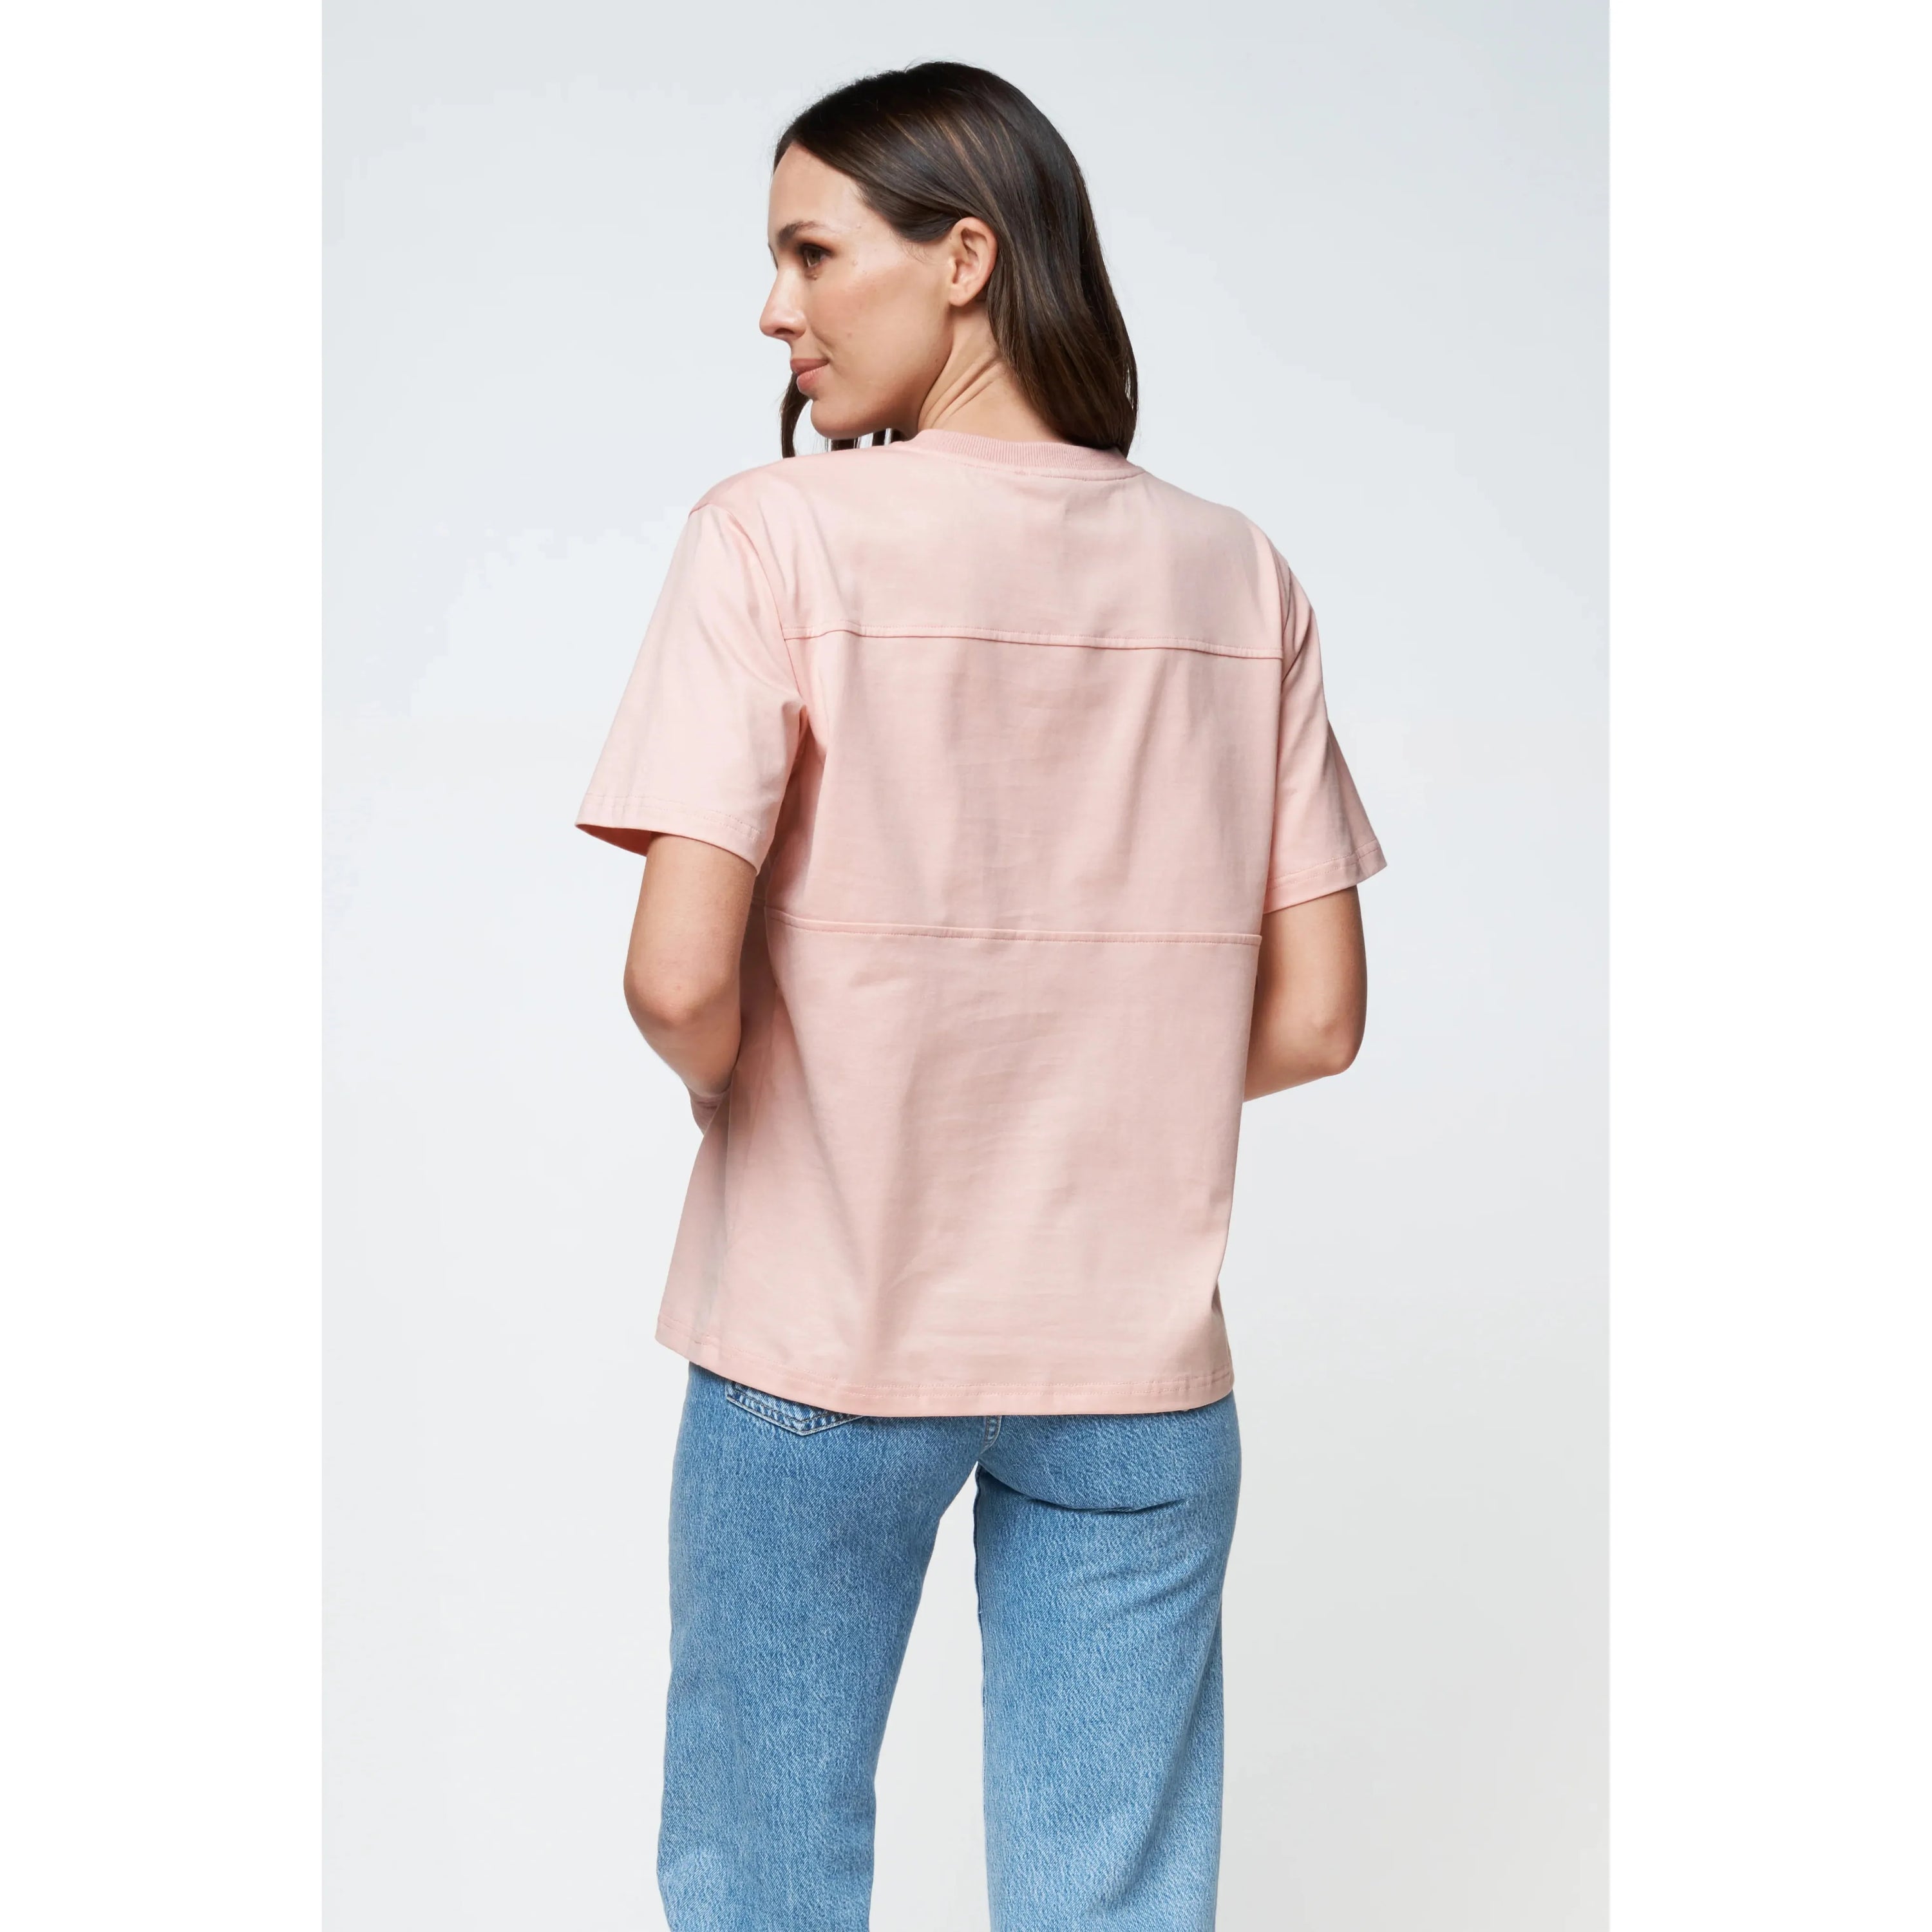 Riviera Embroidered Panel Tee - Pink / White